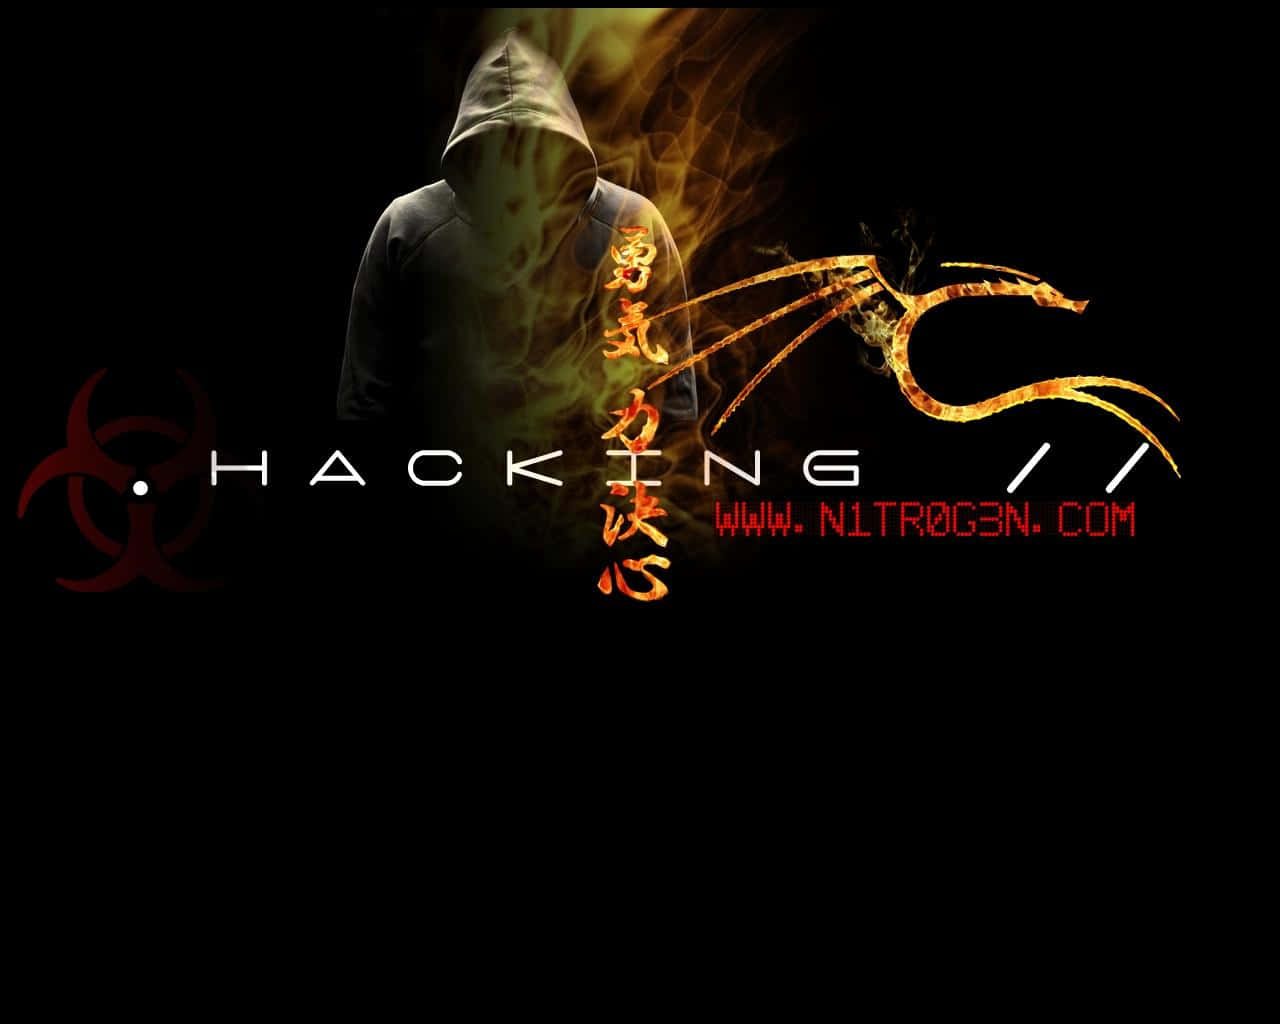 Ethical Or Professional Hacker's Logo Wallpaper